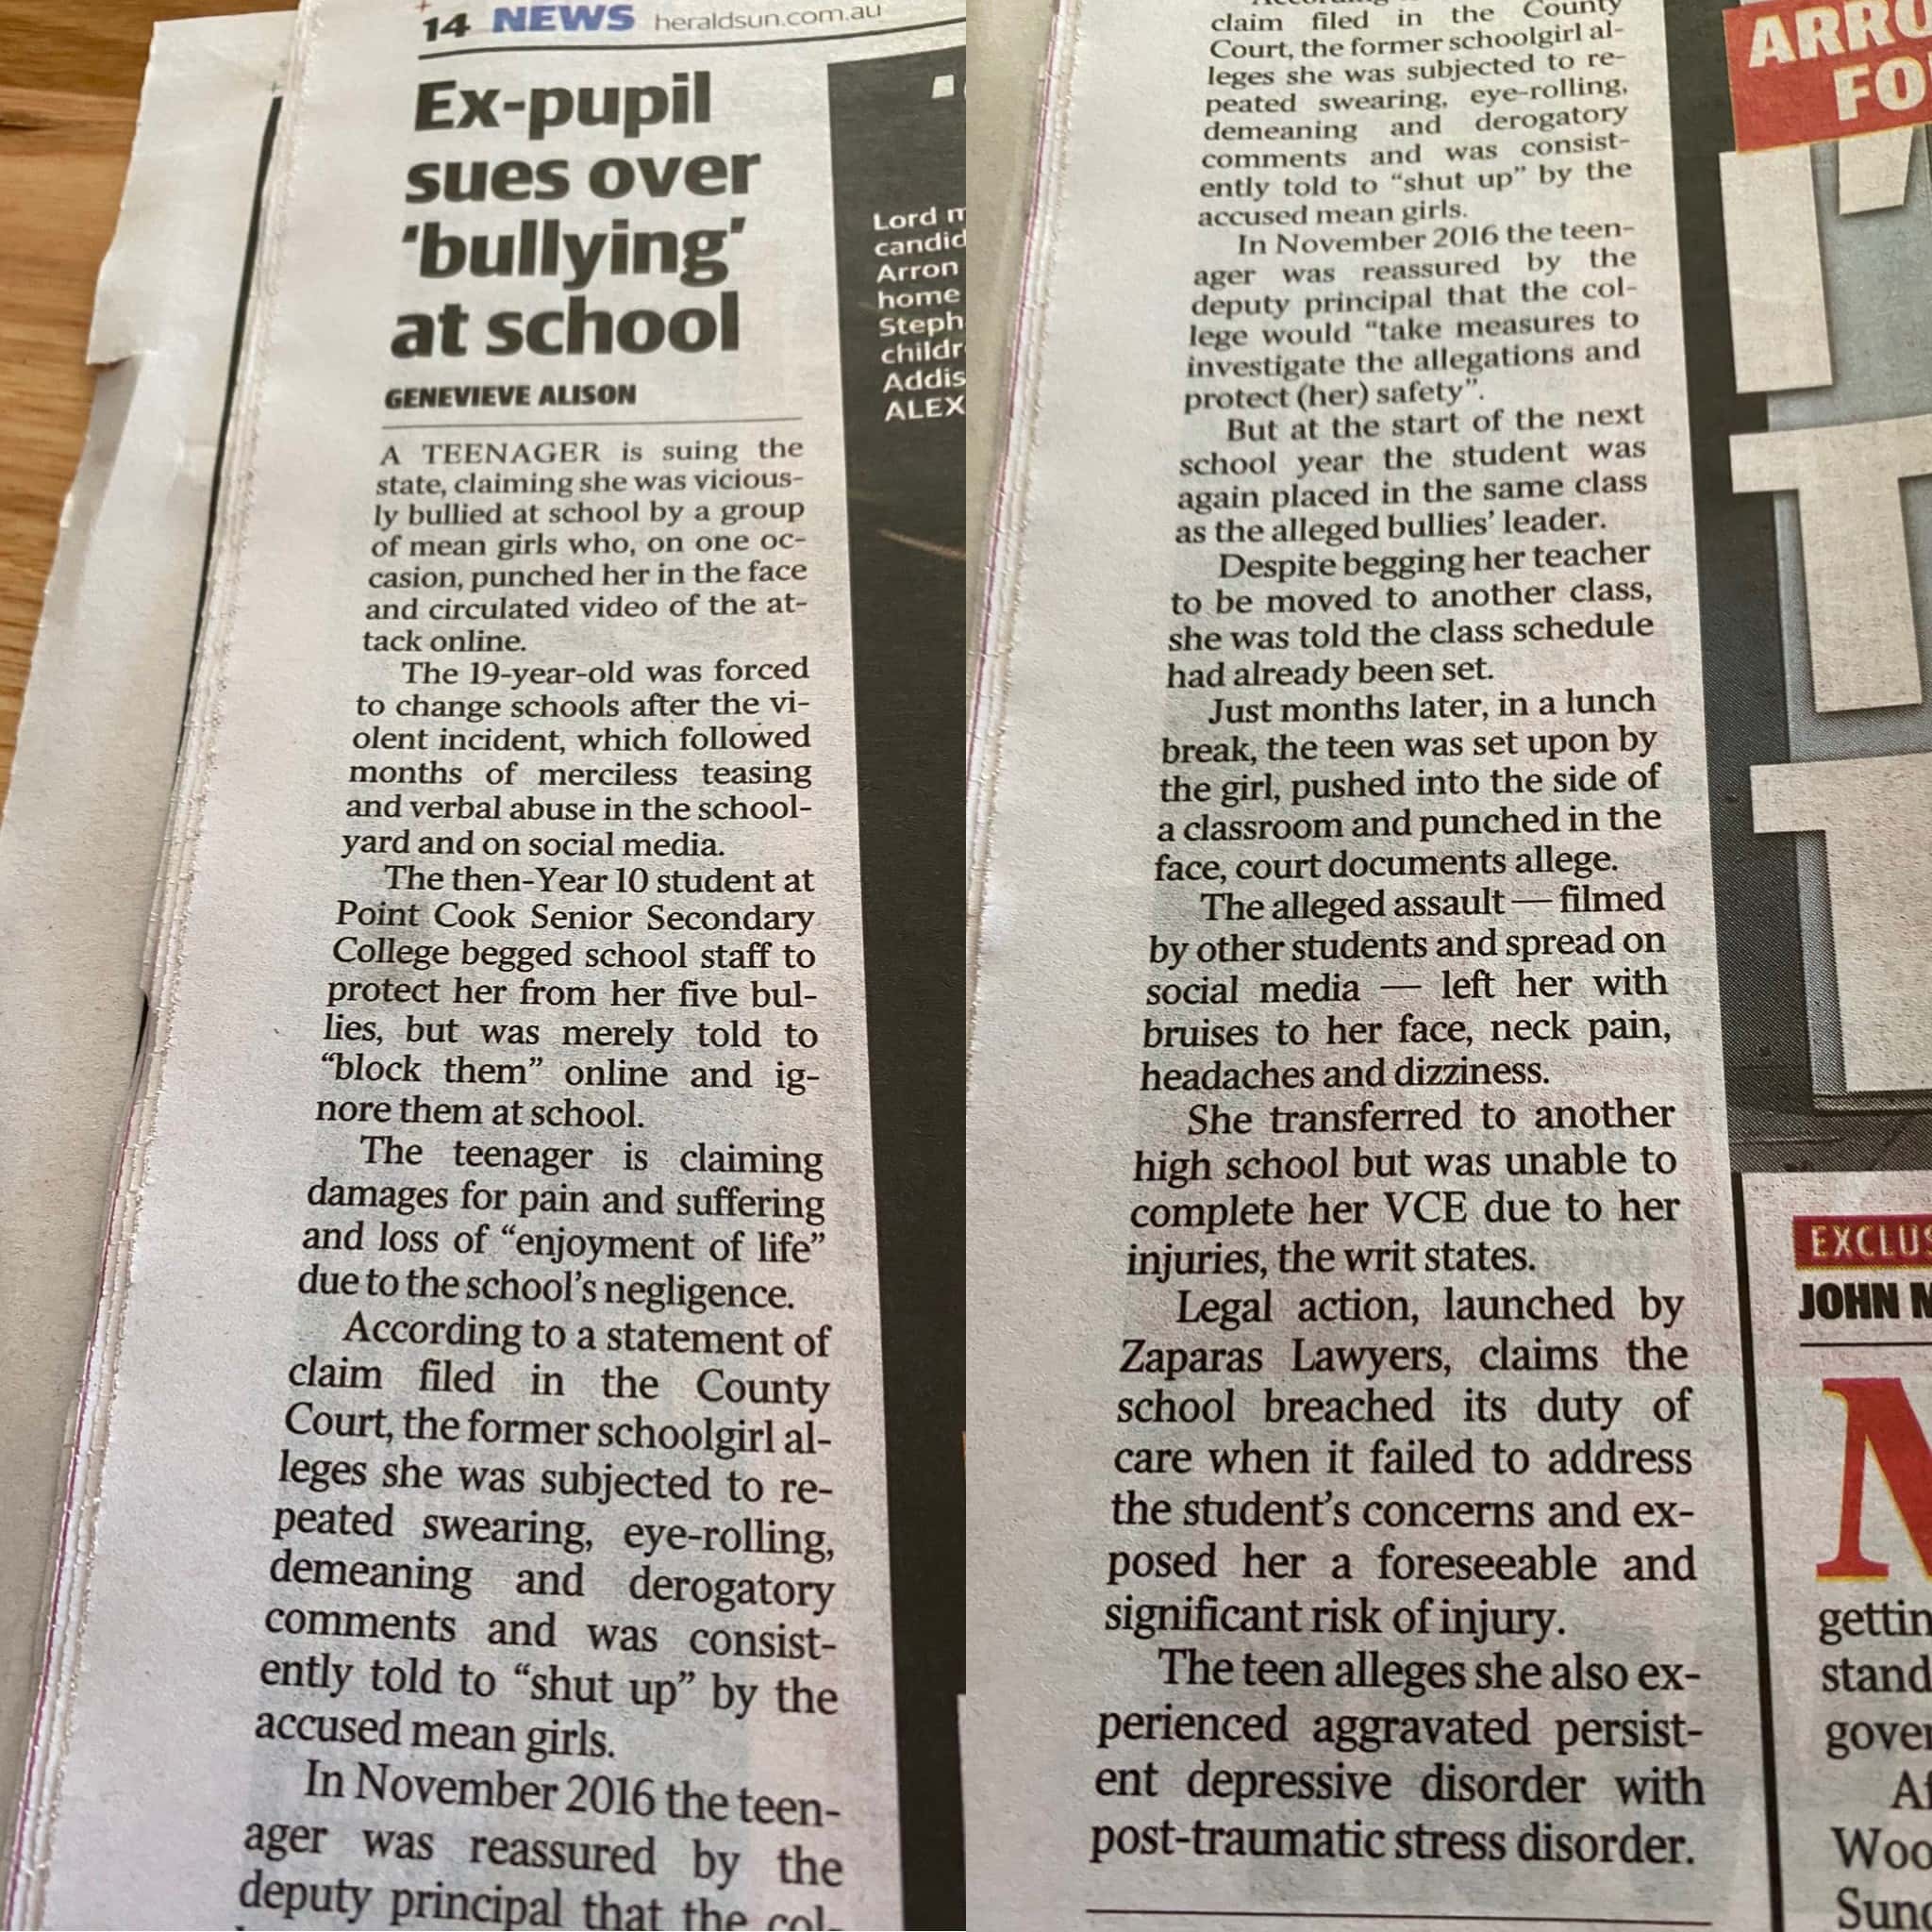 Newspaper article about school bullying public liability claim